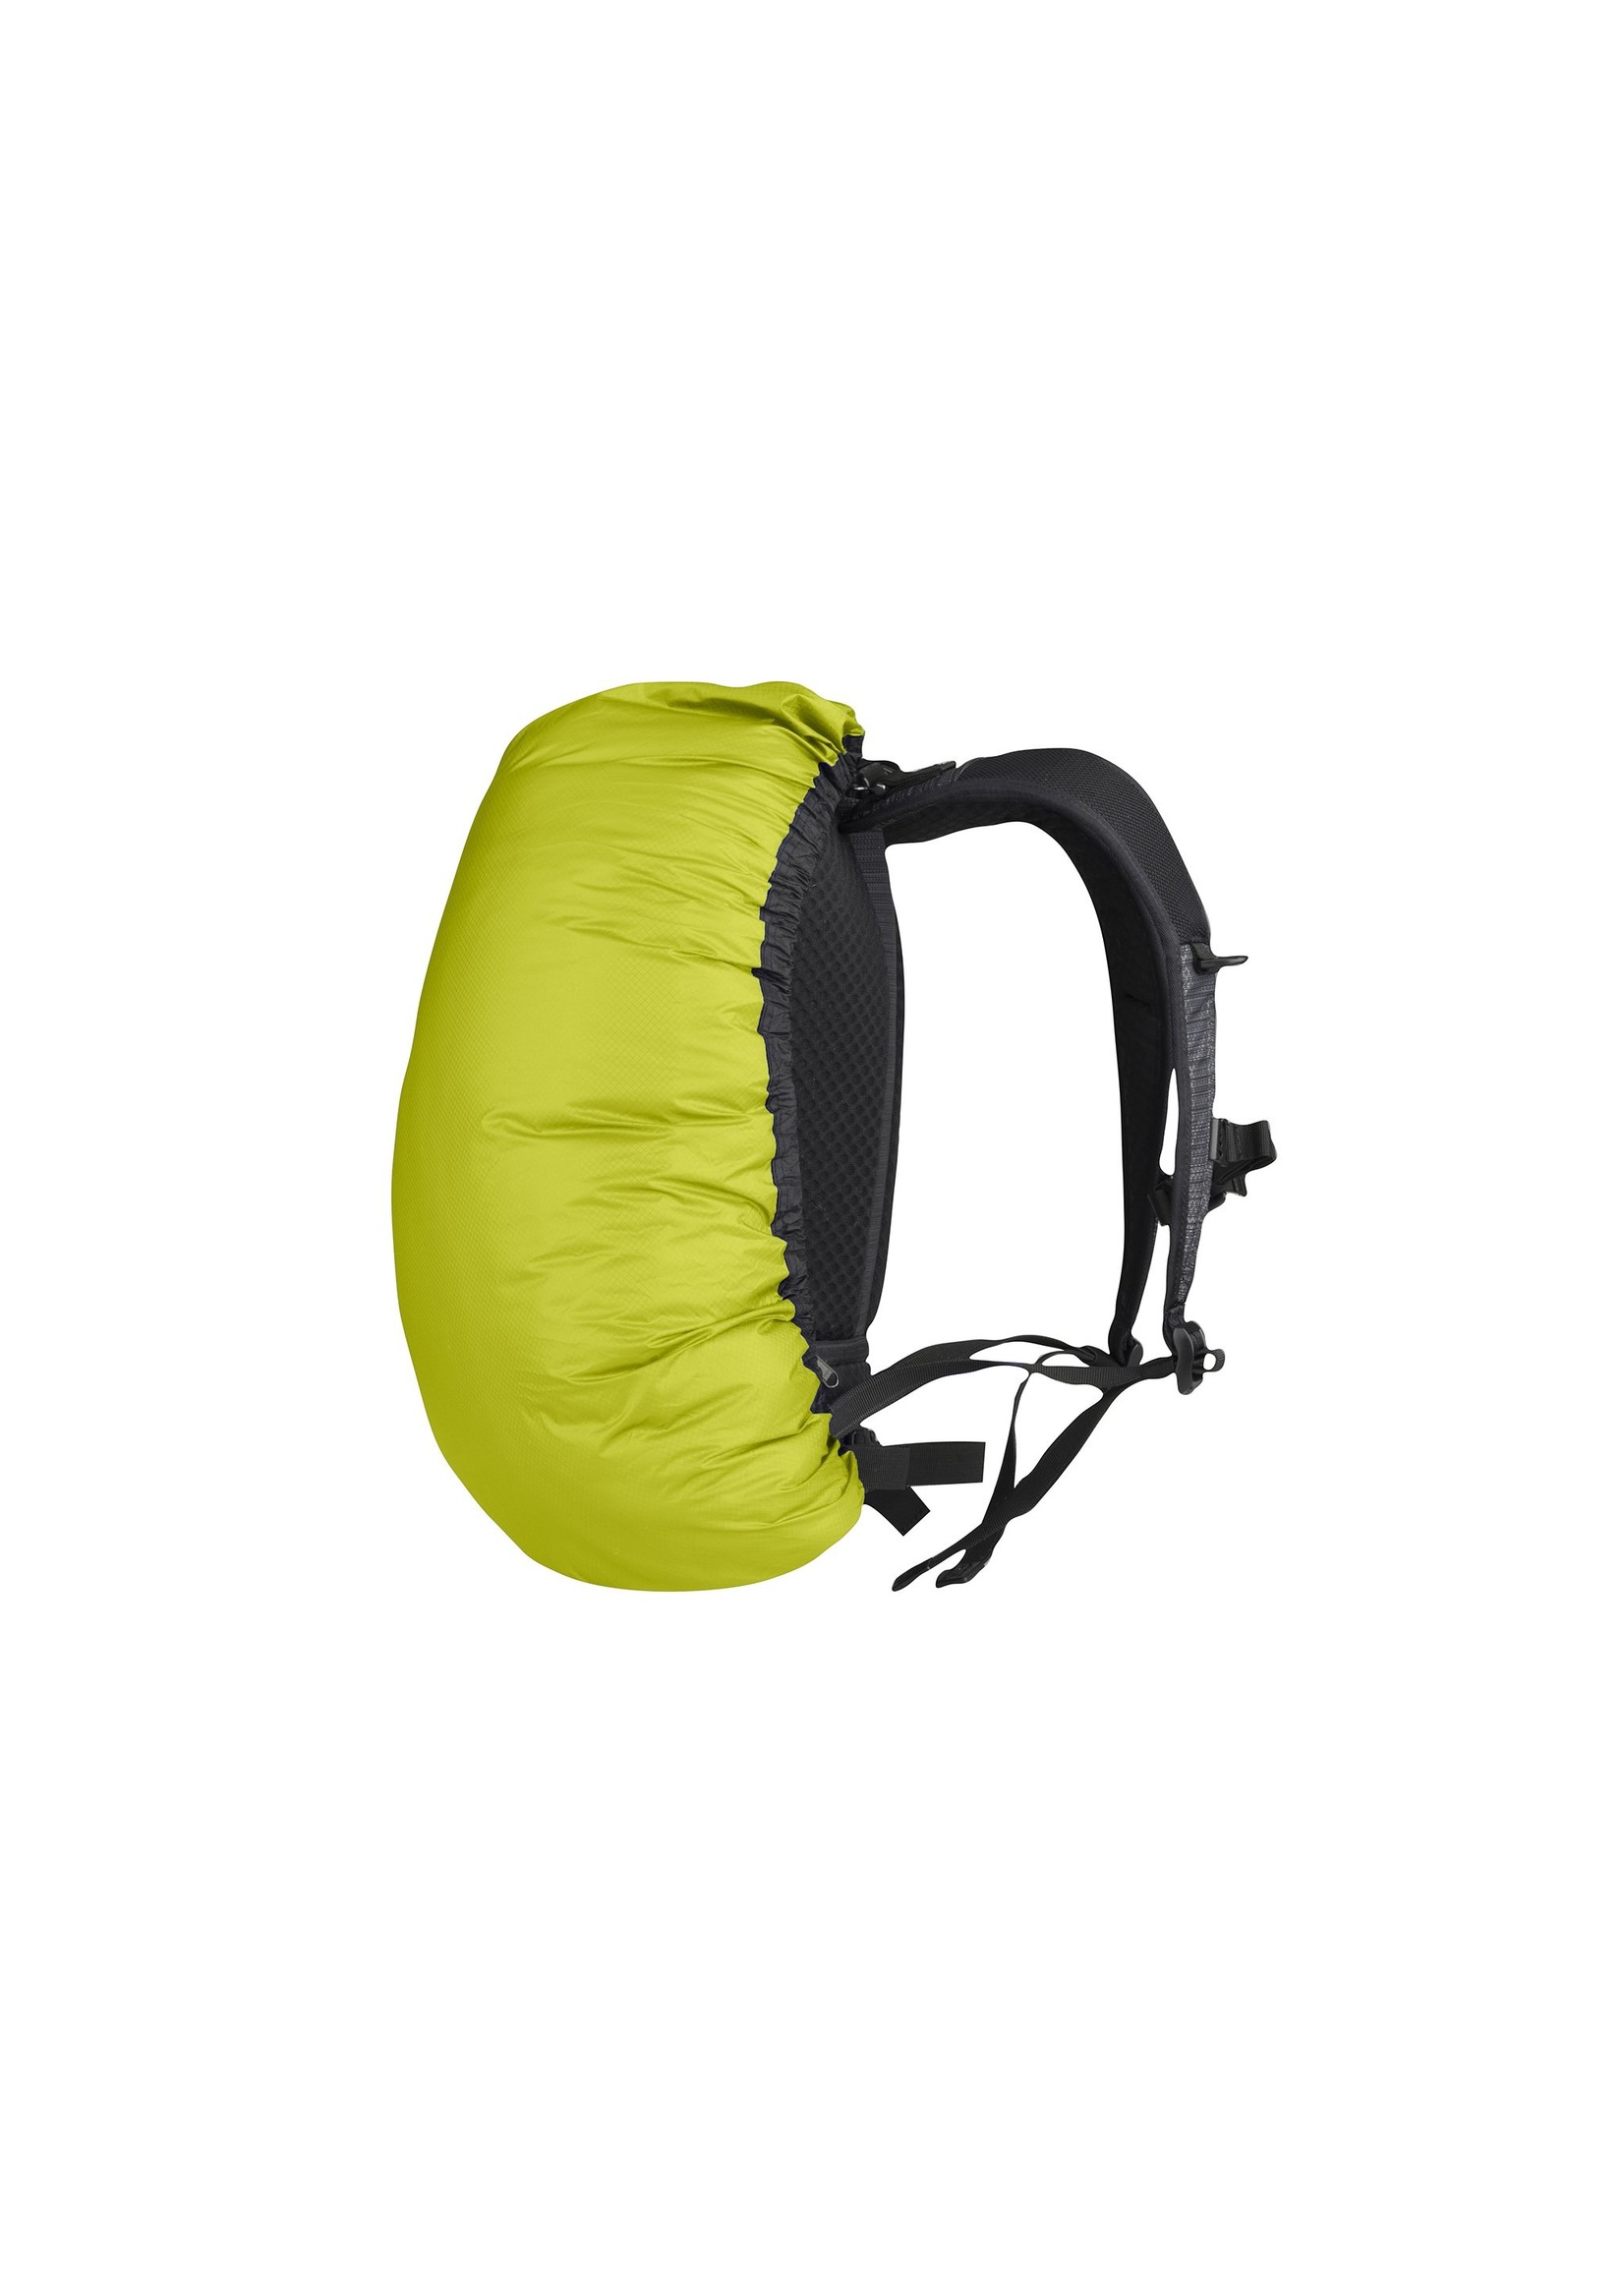 Sea To Summit Ultra-Sil Pack Cover - Small - 30L to 50L - Lime Green